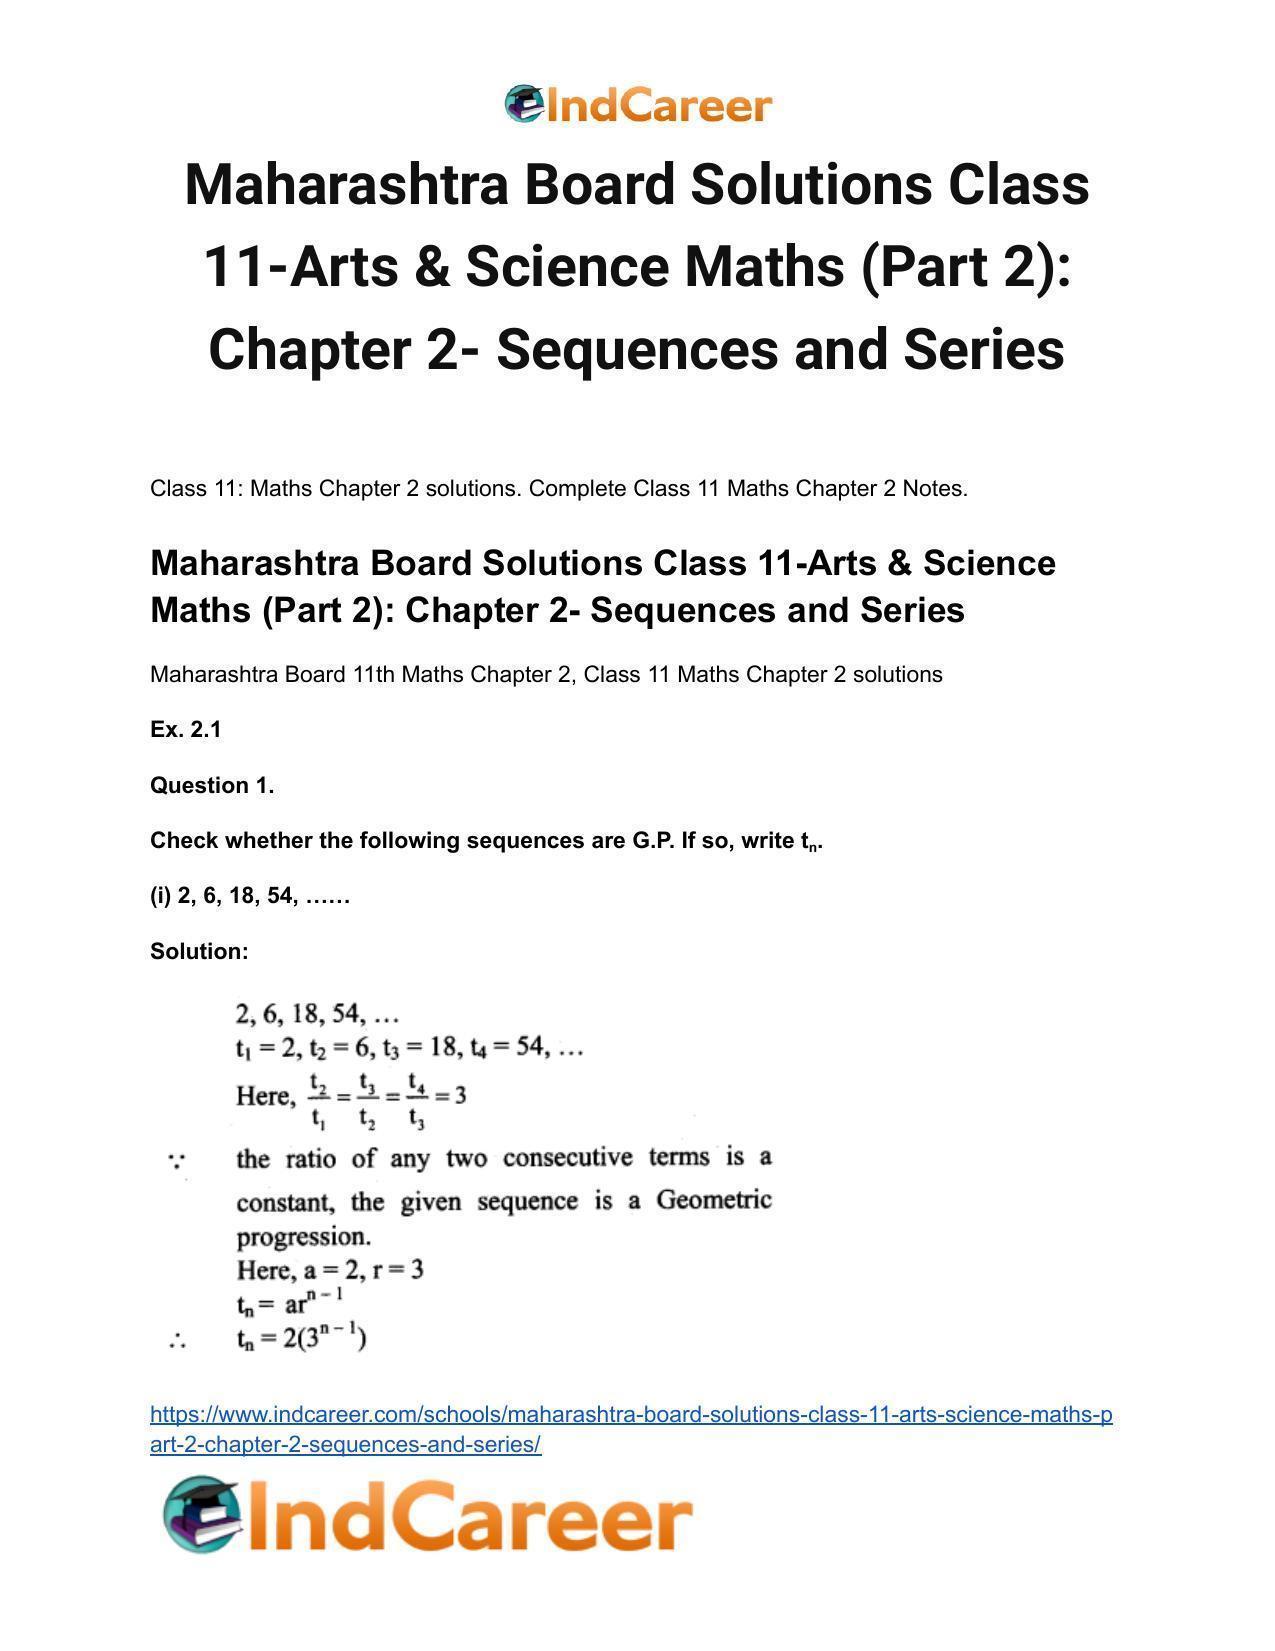 Maharashtra Board Solutions Class 11-Arts & Science Maths (Part 2): Chapter 2- Sequences and Series - Page 2